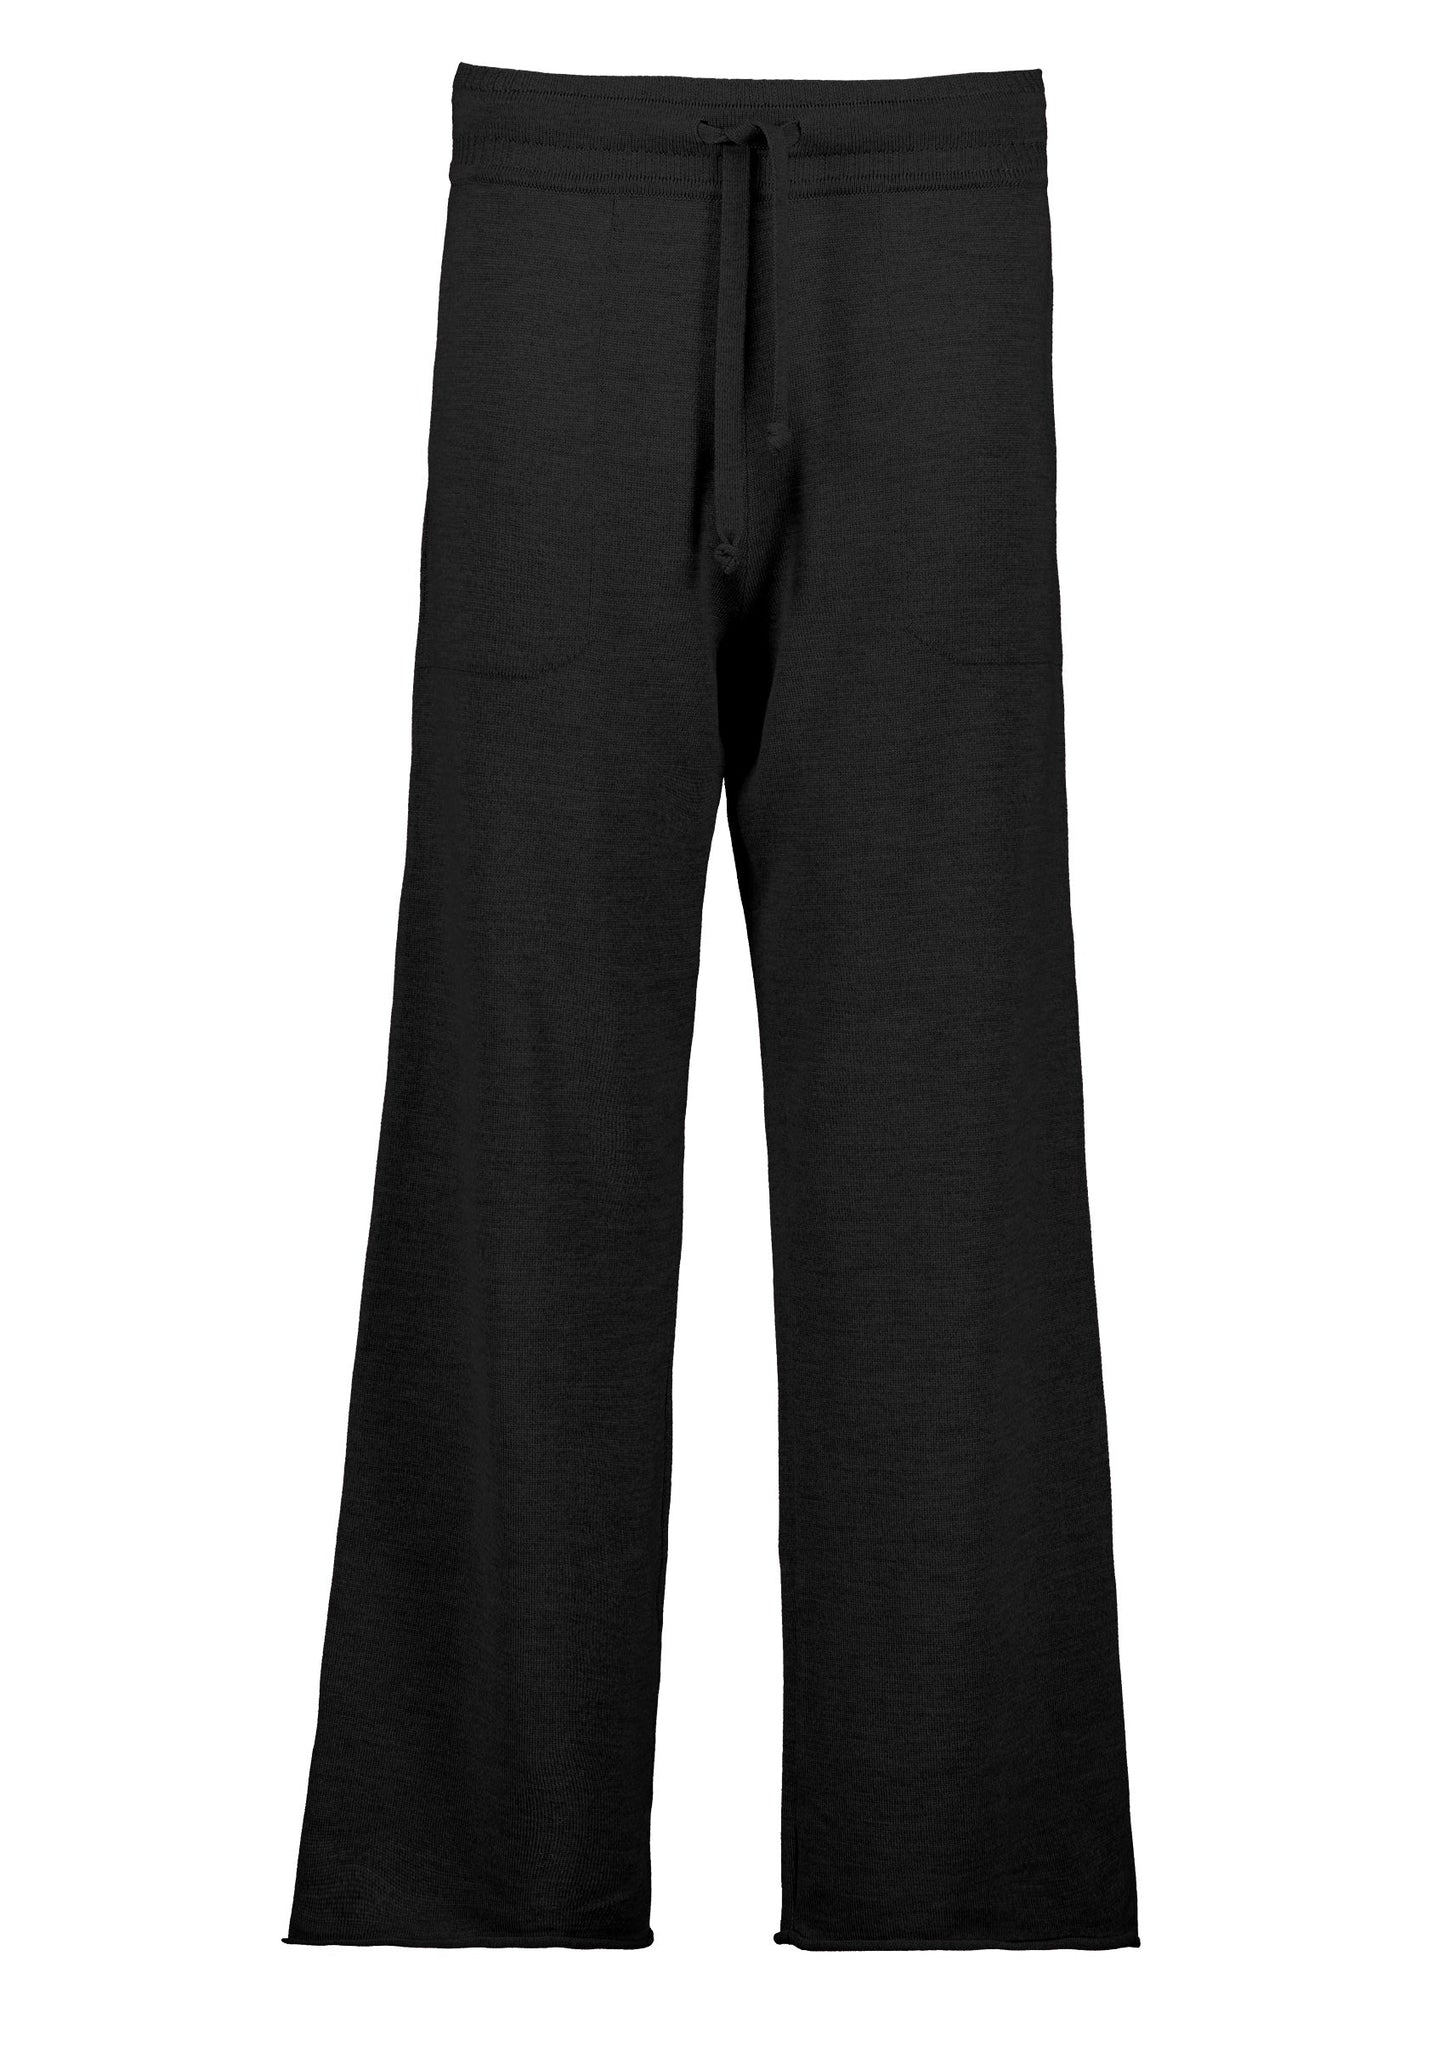 Standard Issue Pant | Black